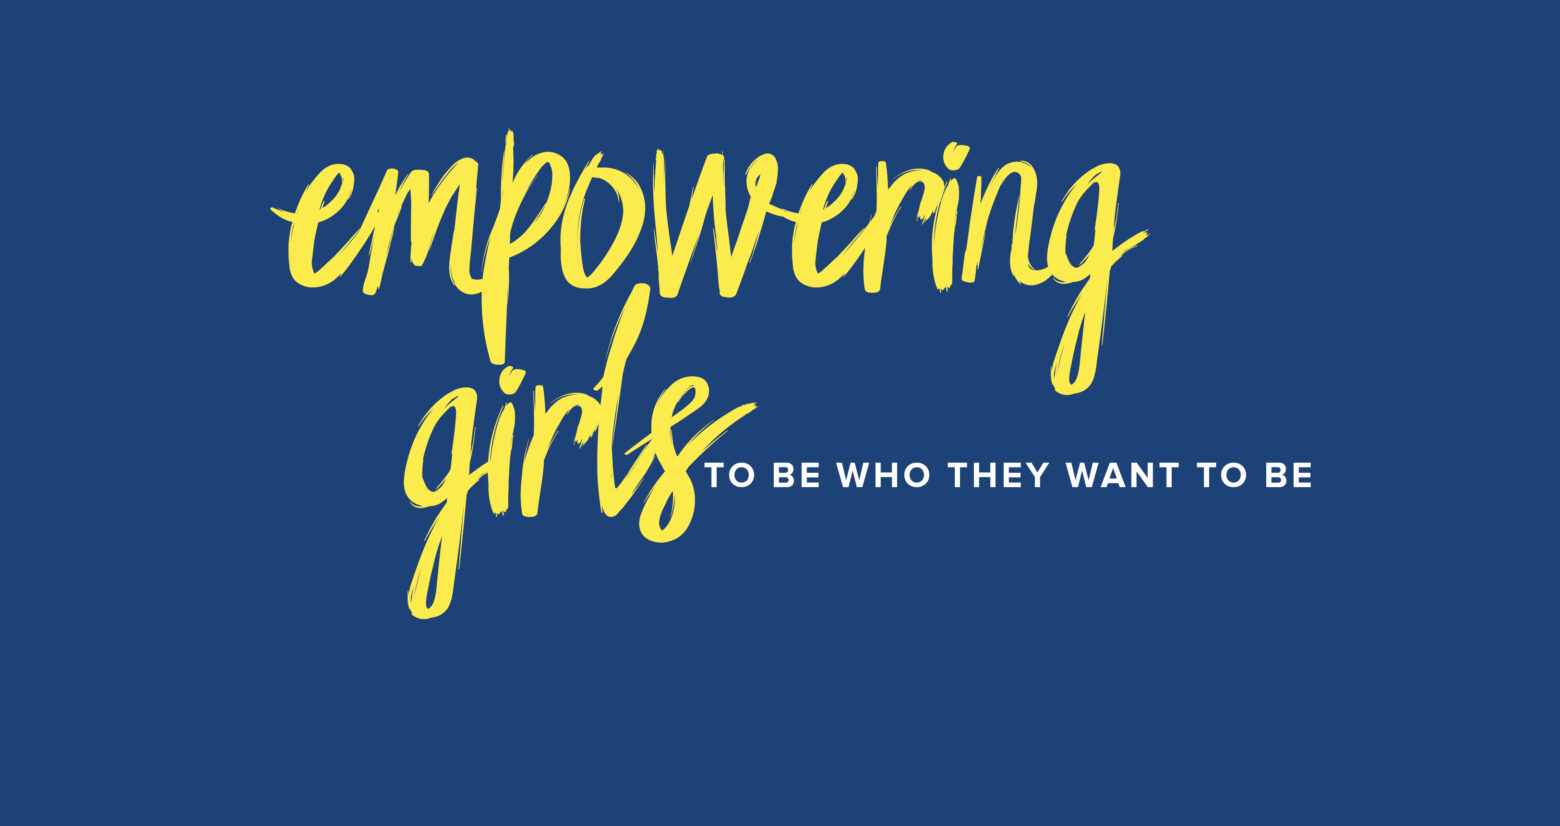 Empowering Girls to be who they want to be in the world